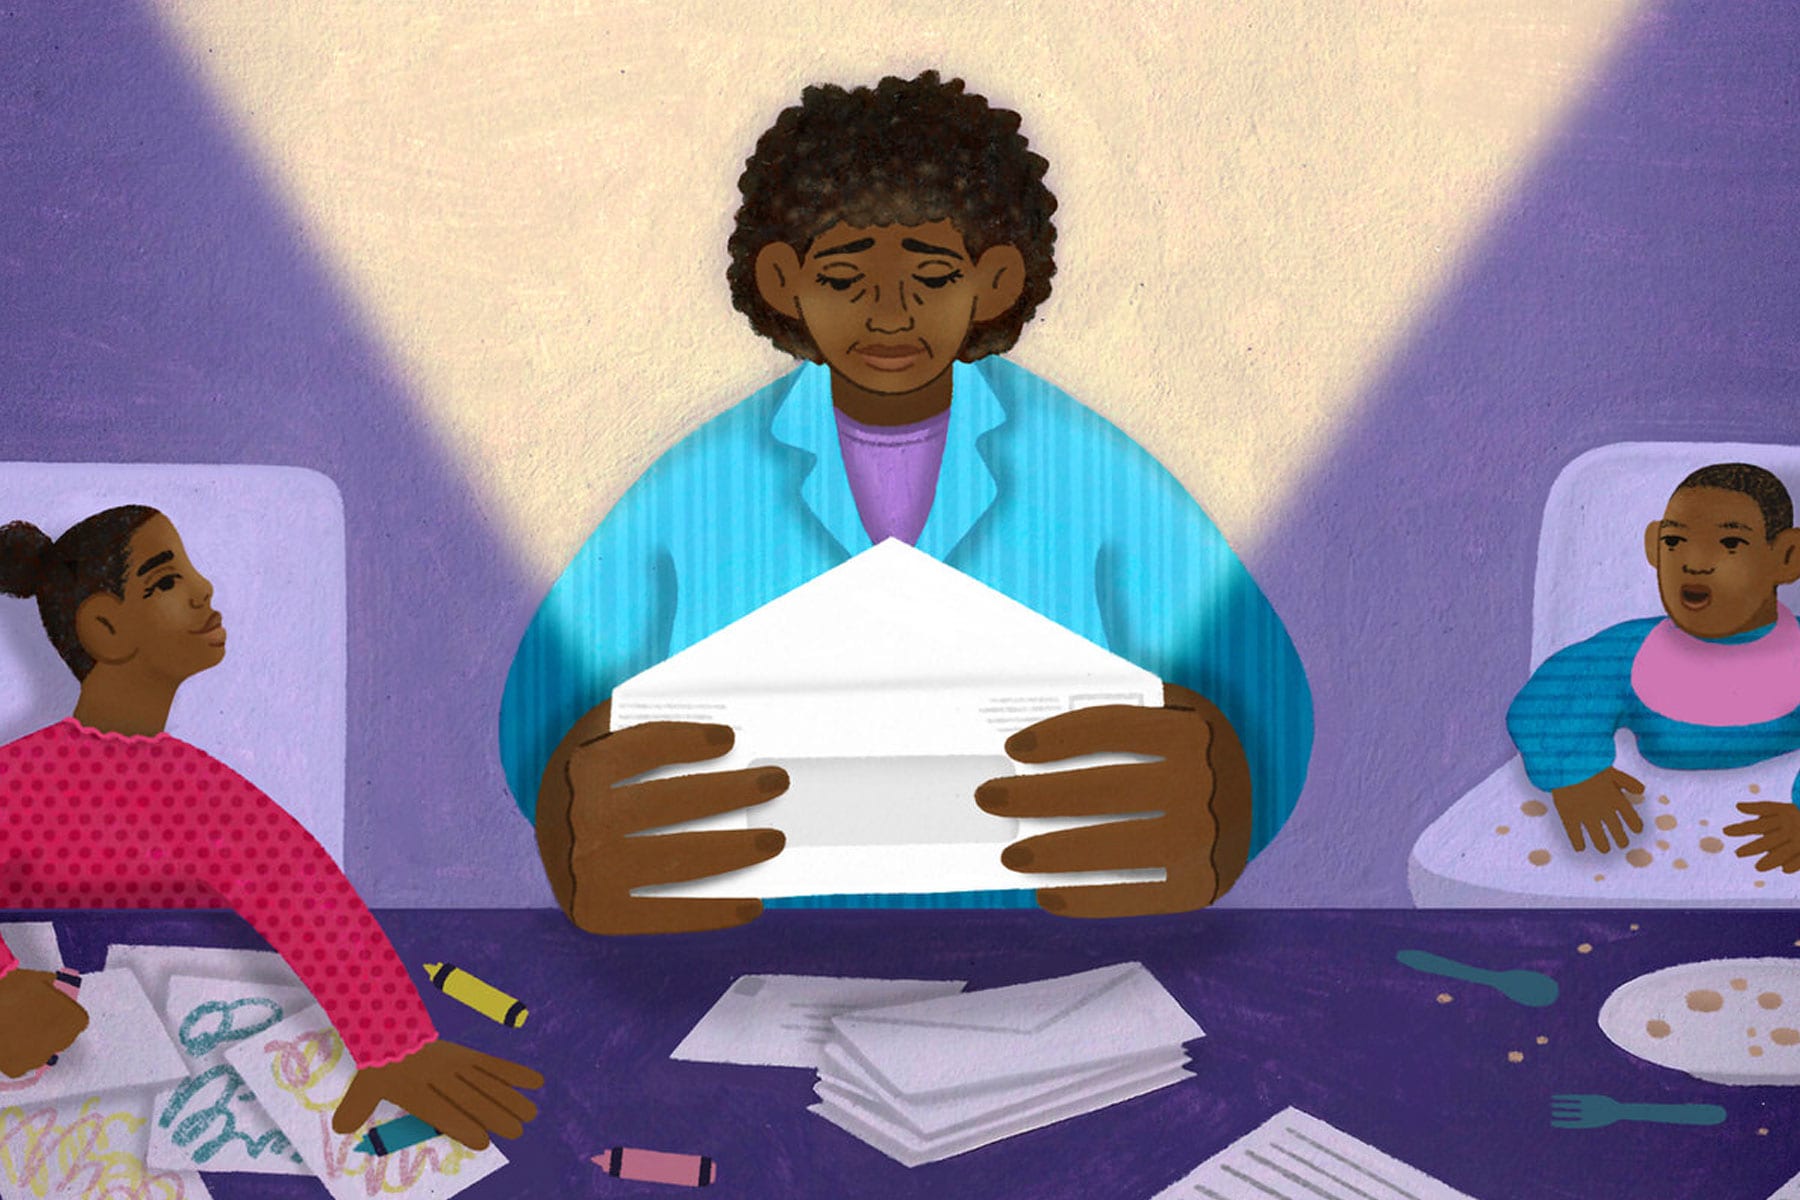 An illustration of a mother opening an envelope with her two kids at a kitchen table.